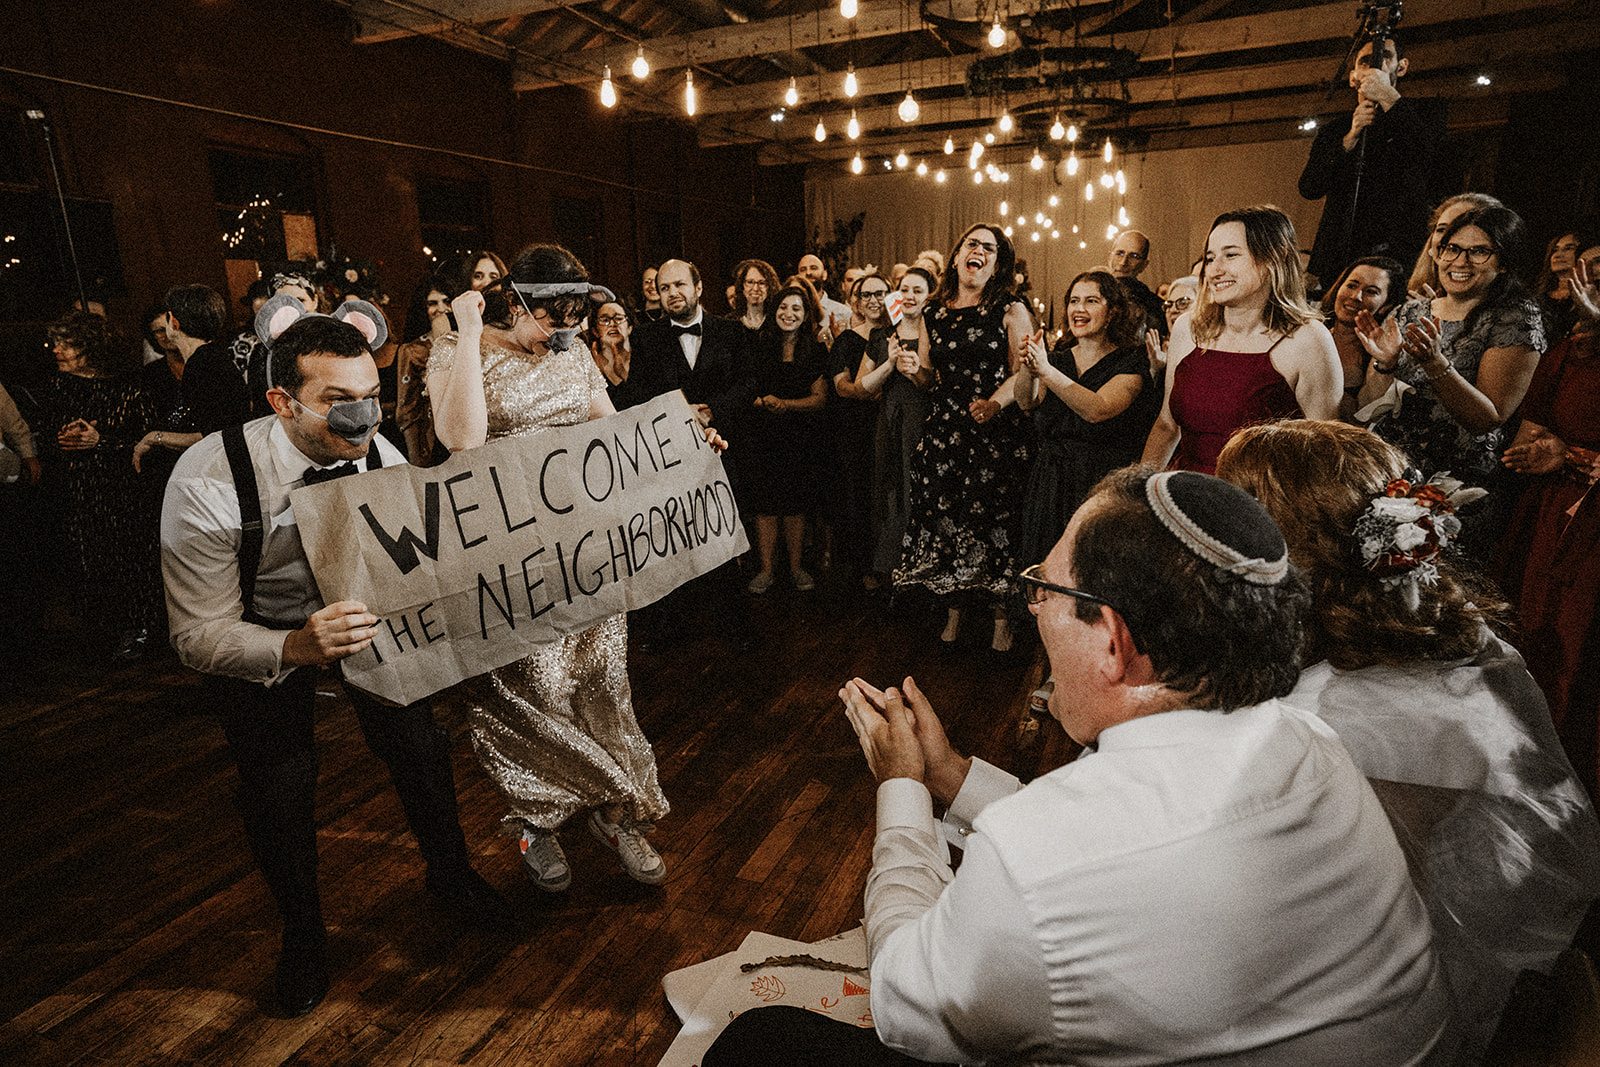 traditional schtick performances made to bride and groom during orthodox jewish wedding reception